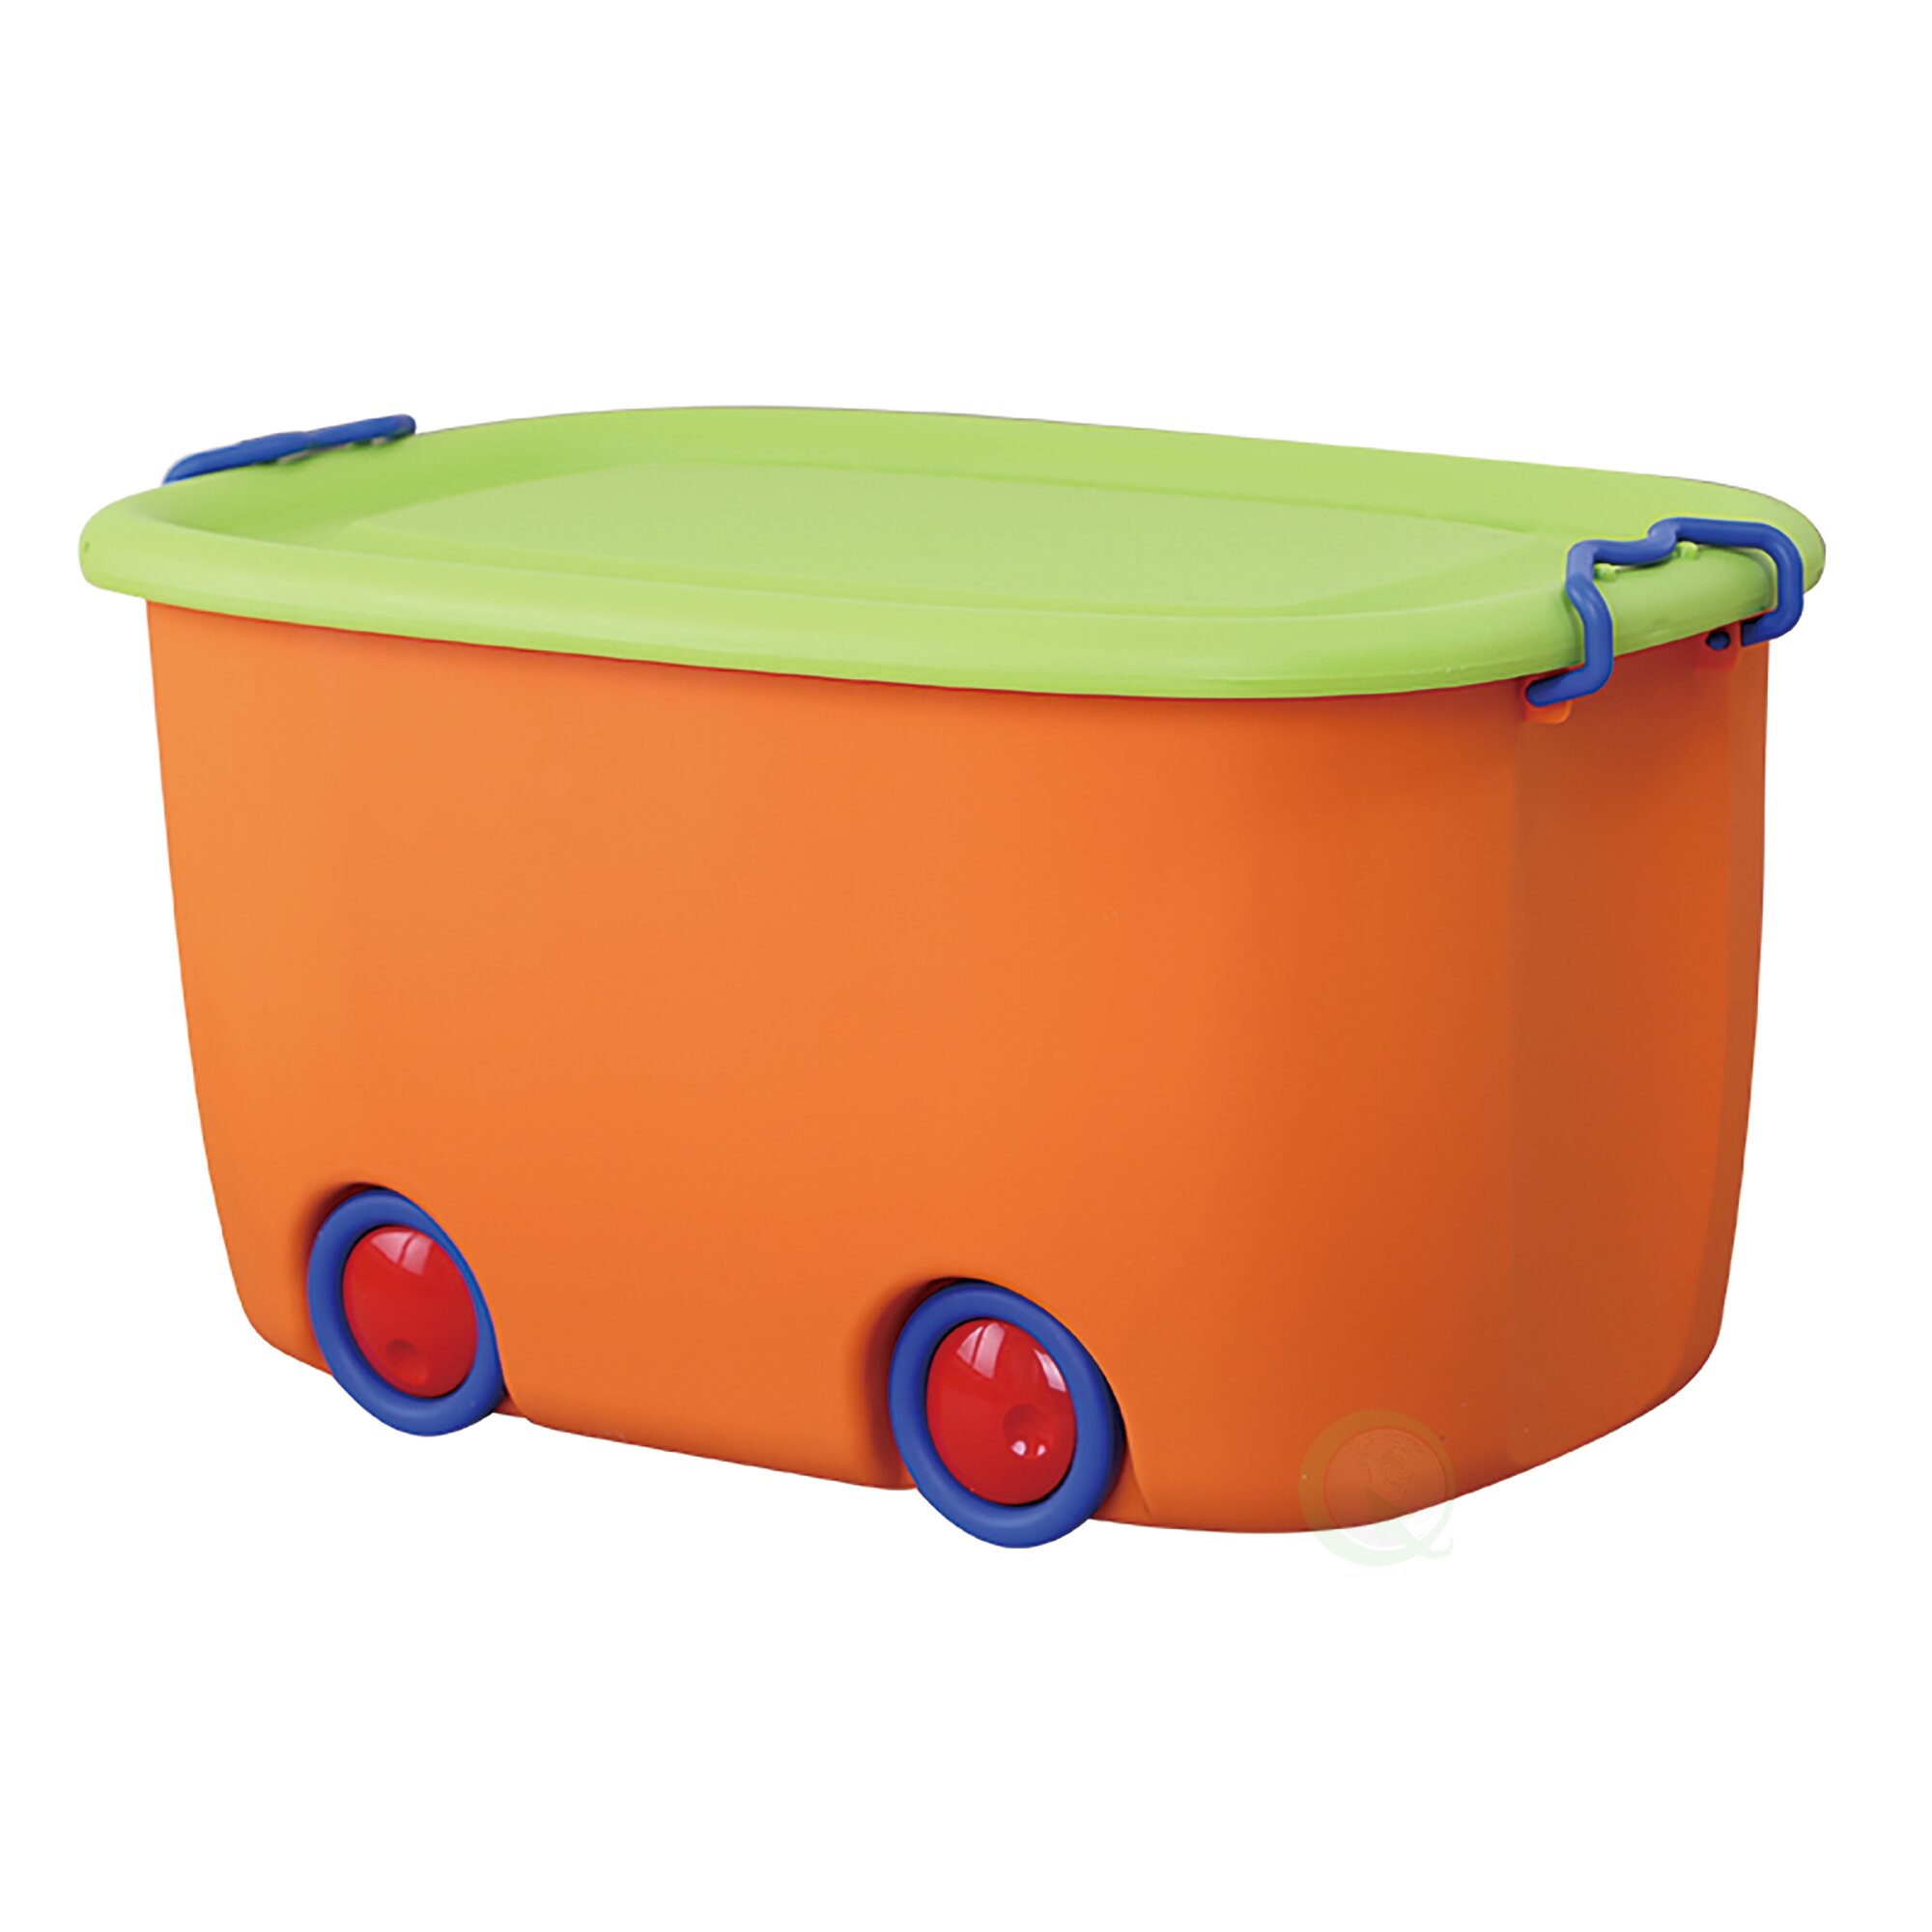 Basicwise Stackable Storage Toy Box & Reviews Wayfair